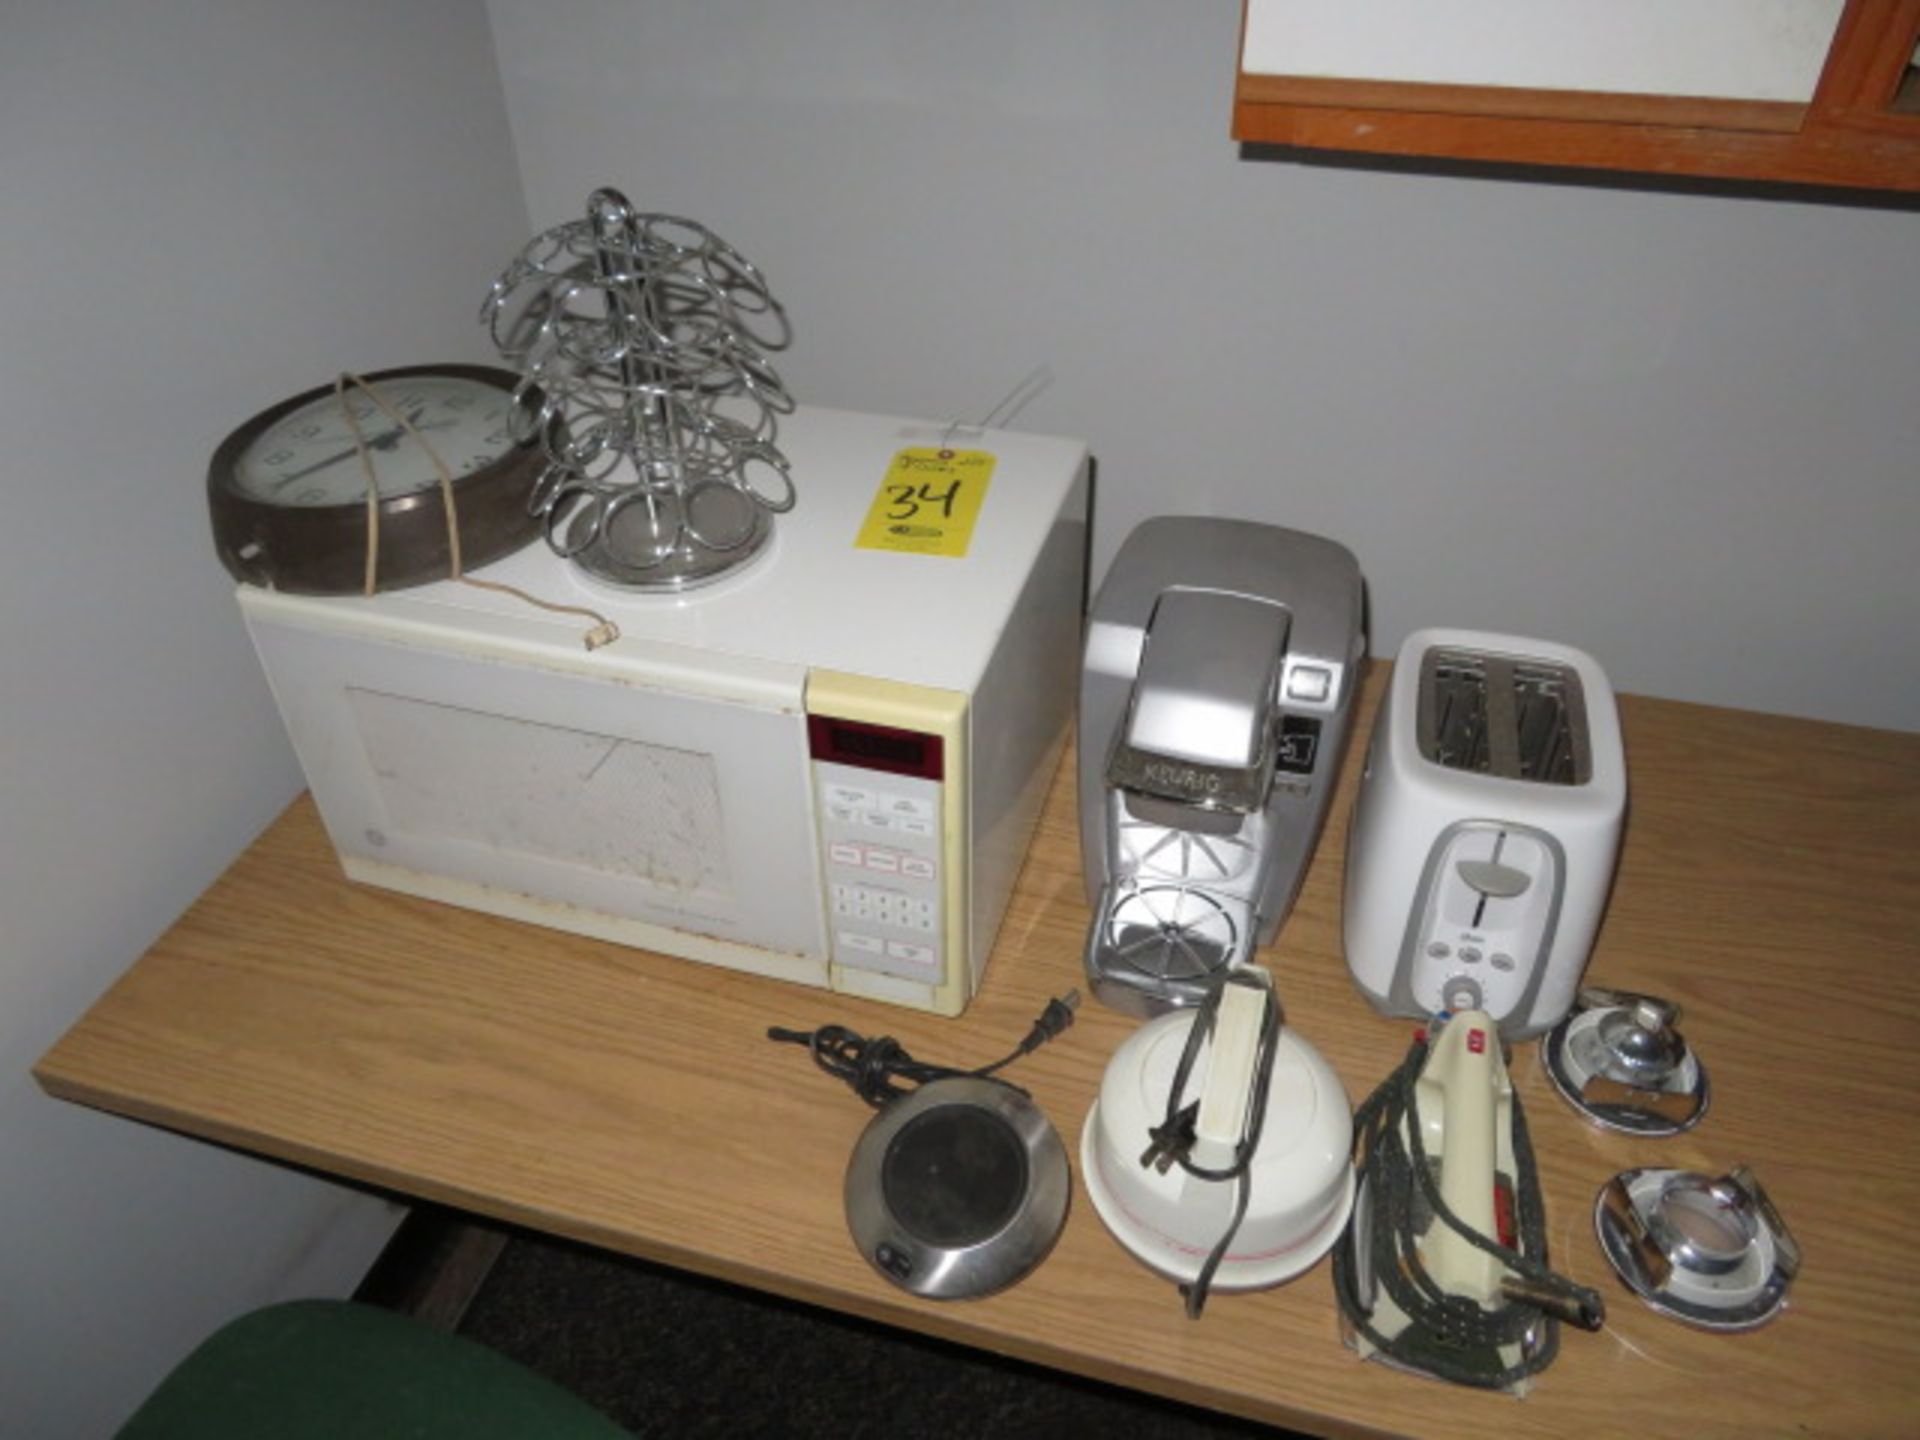 M/W OVEN, TOASTER, KEURIG COFFEE MAKER & DISHES